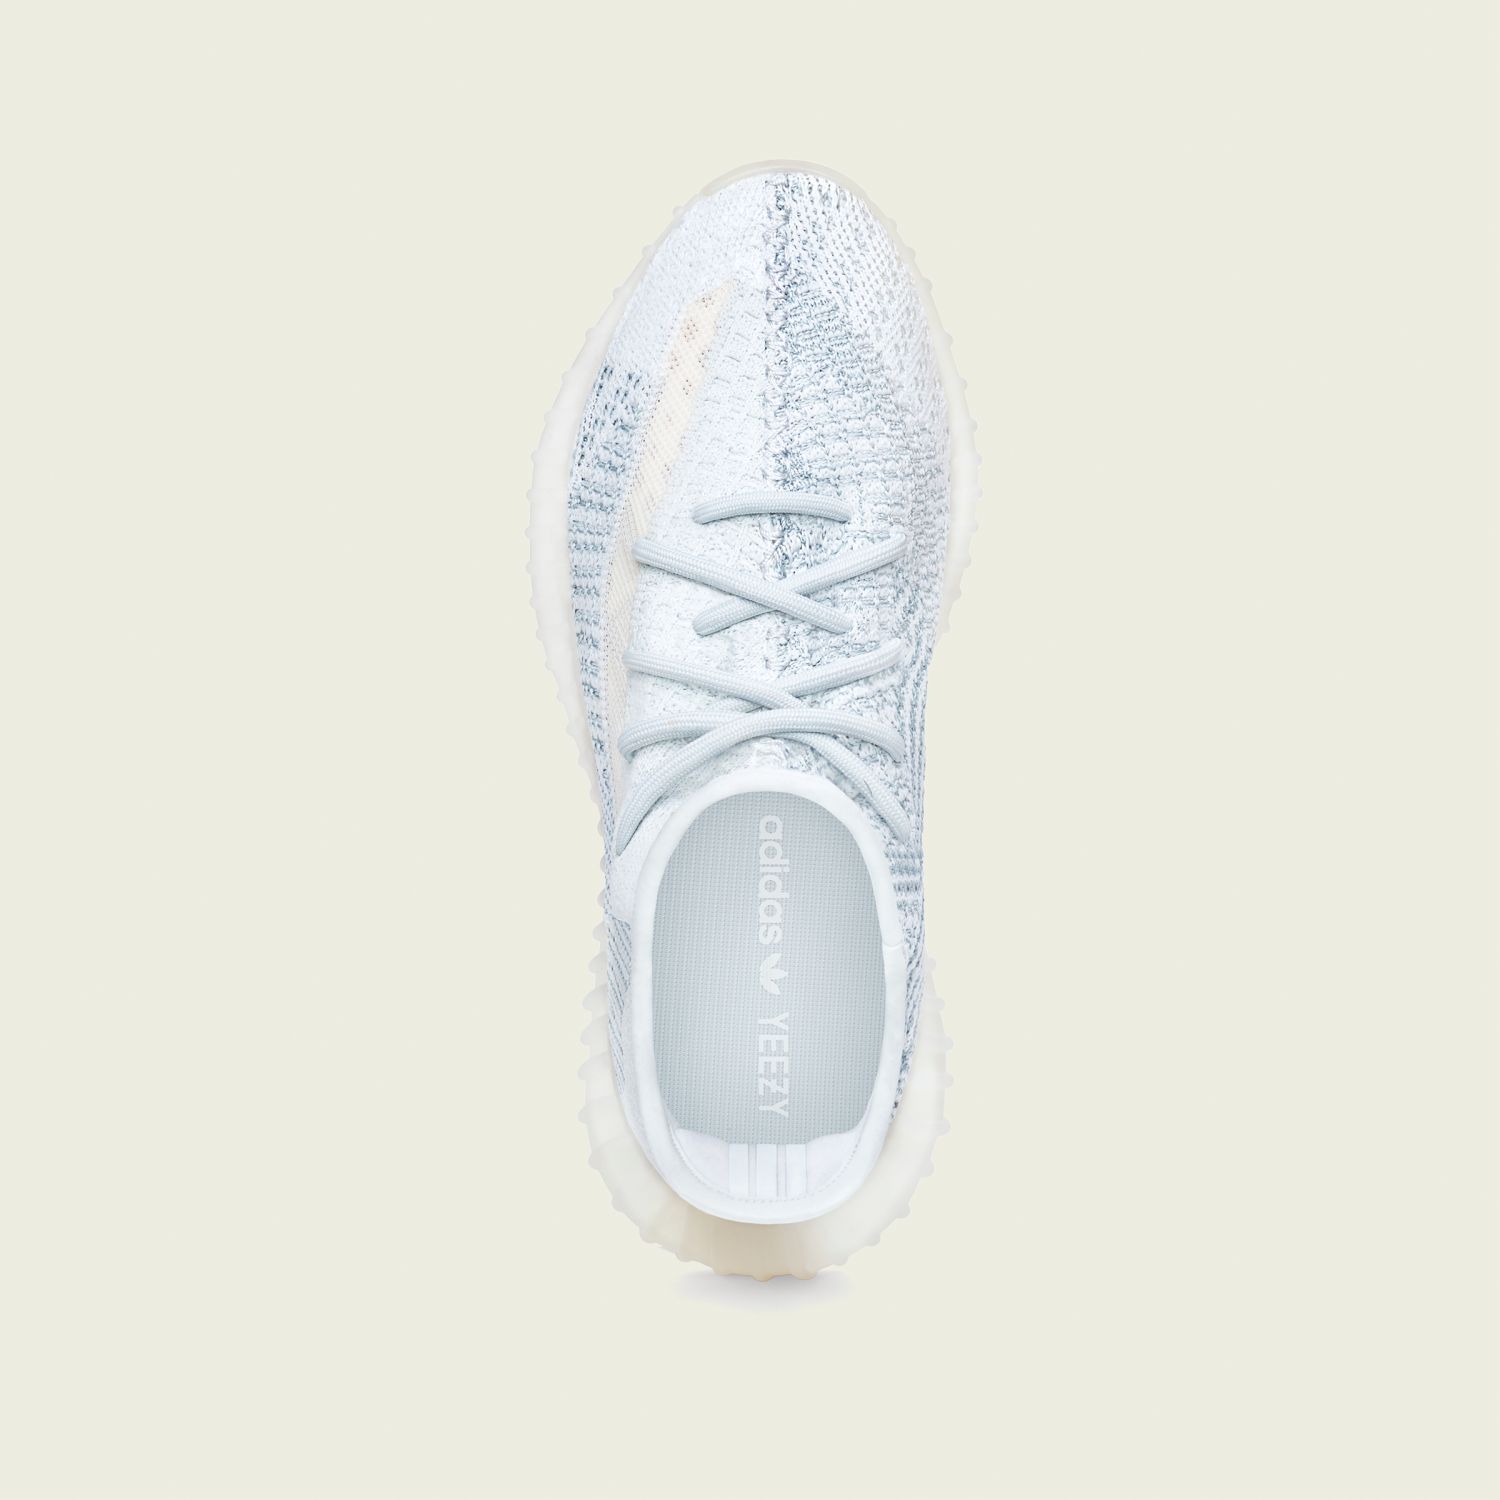 Yeezy Boost 350 V2 Cloud White (Non-Reflective) [3]